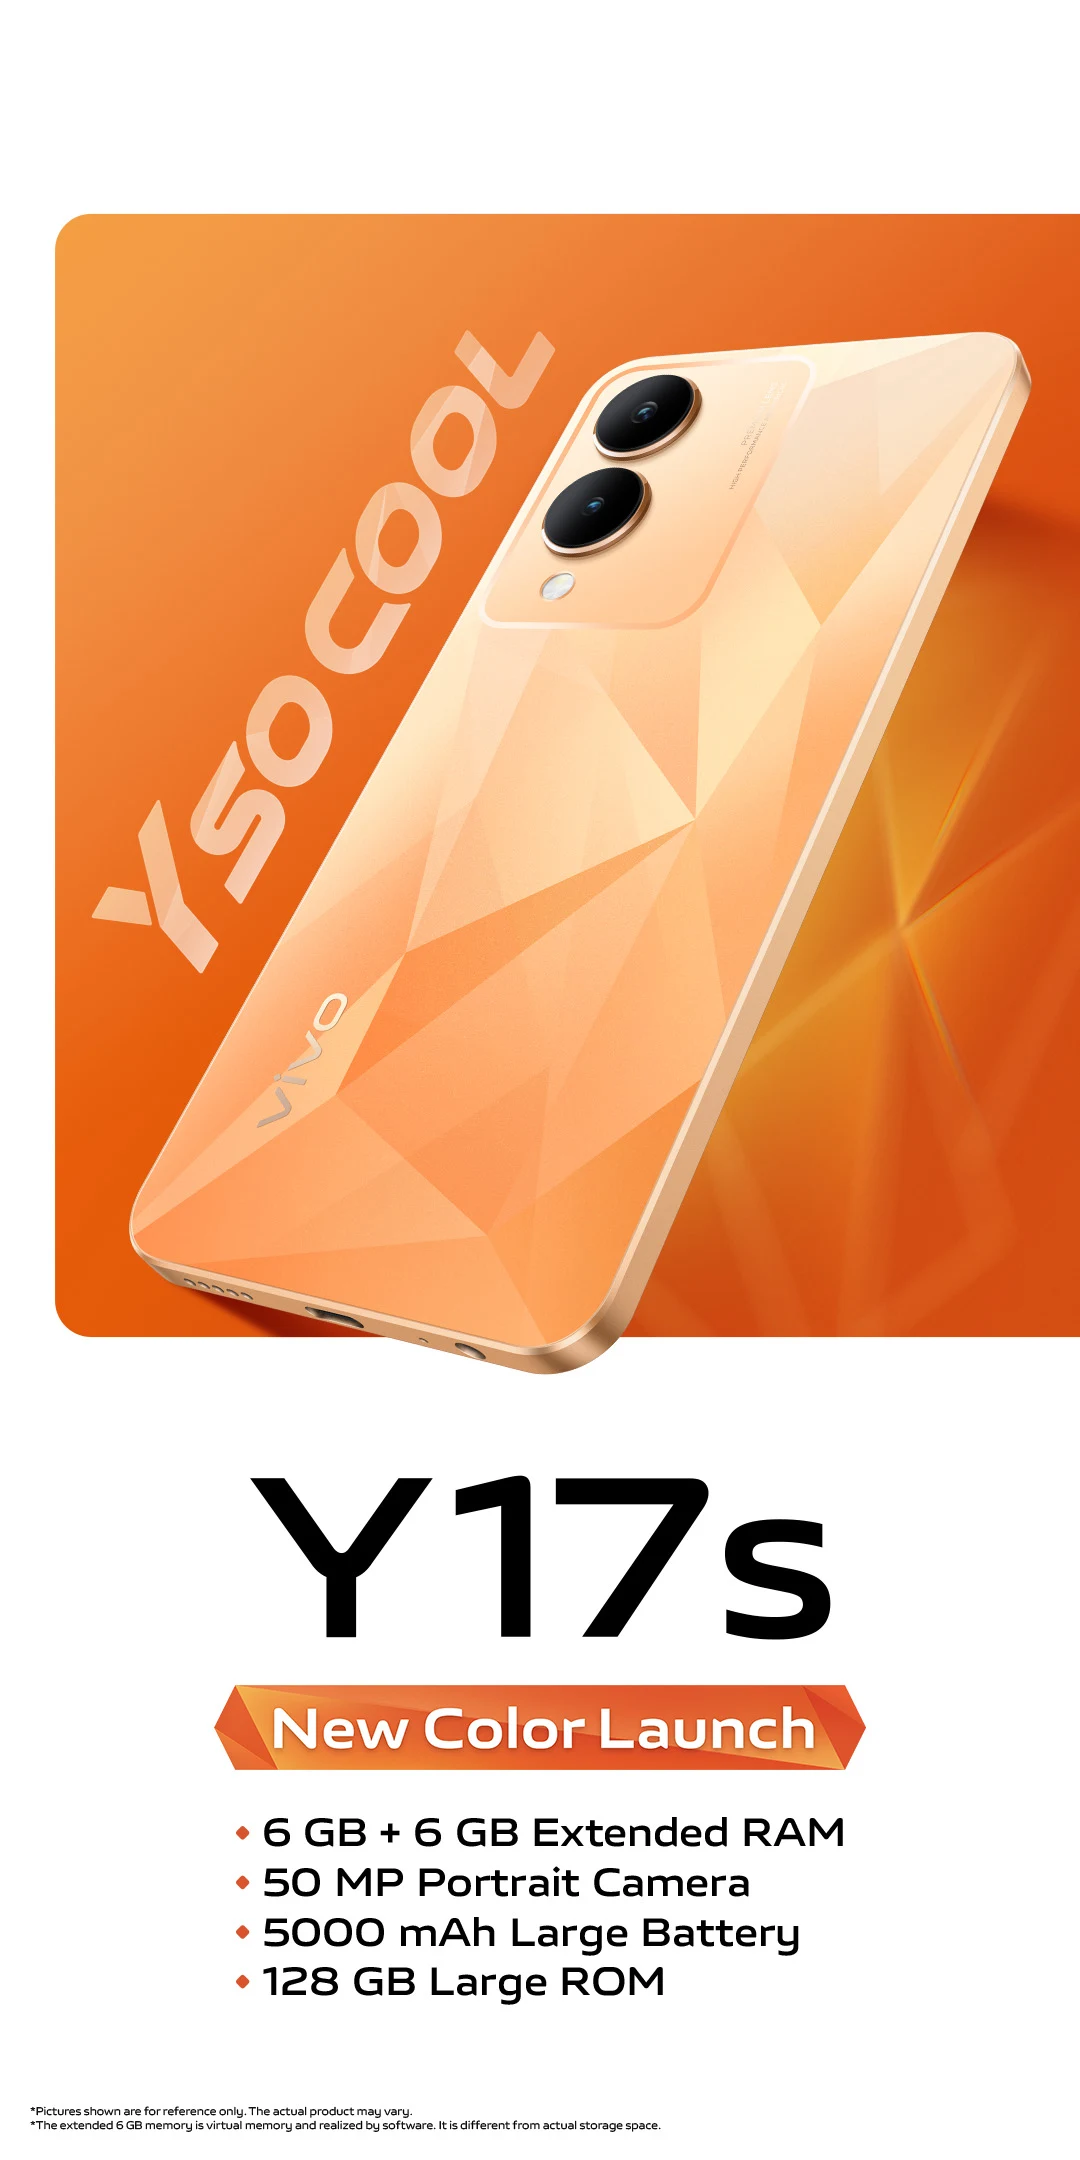 vivo Y17s – Now Available with 4GB + 4GB Extended RAM - Teleco Alert